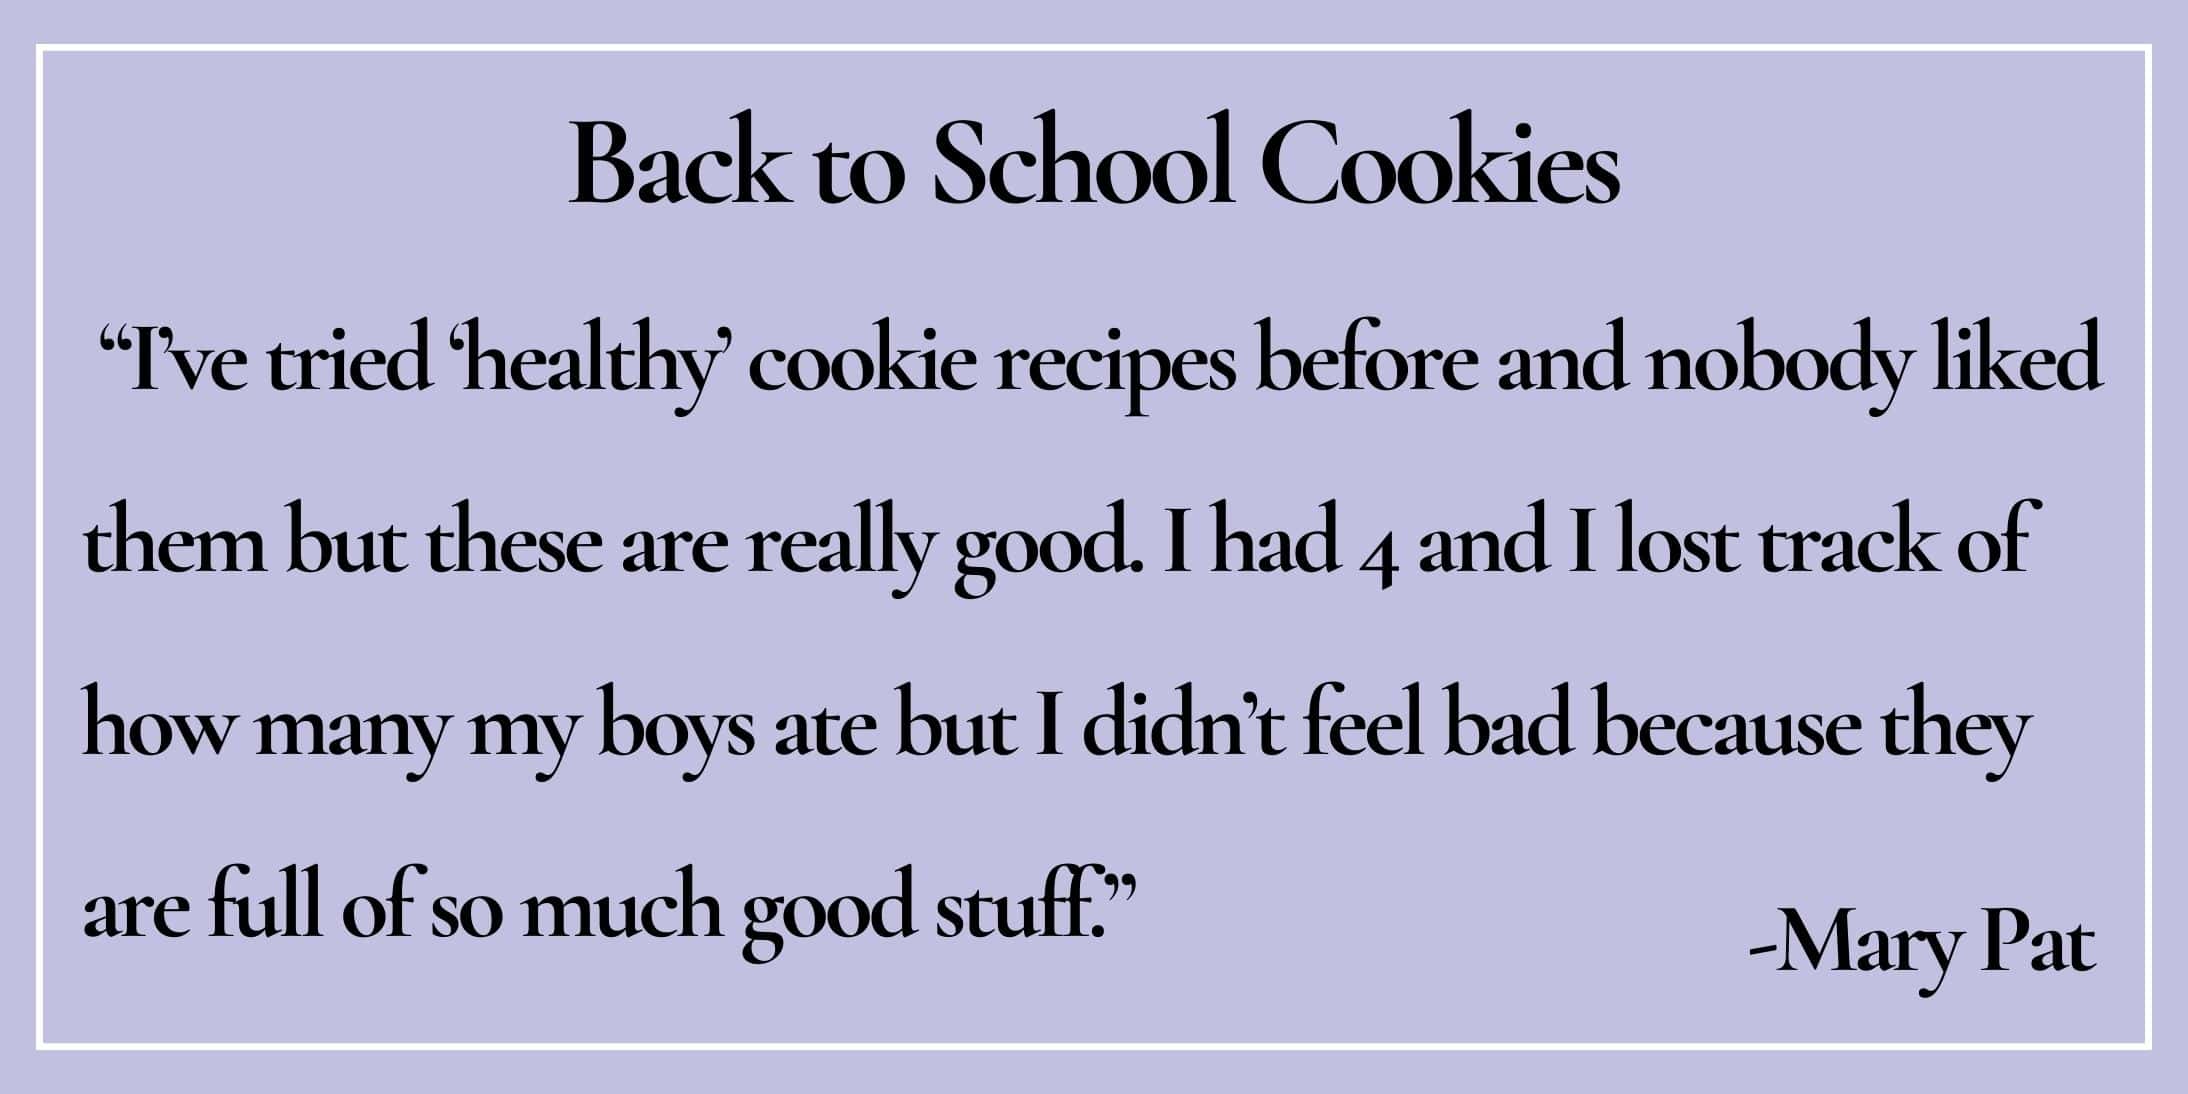 text box with paraphrase: I lost track of how many my boys ate but I didn’t feel bad because they are full of so much good stuff. -Mary Pat